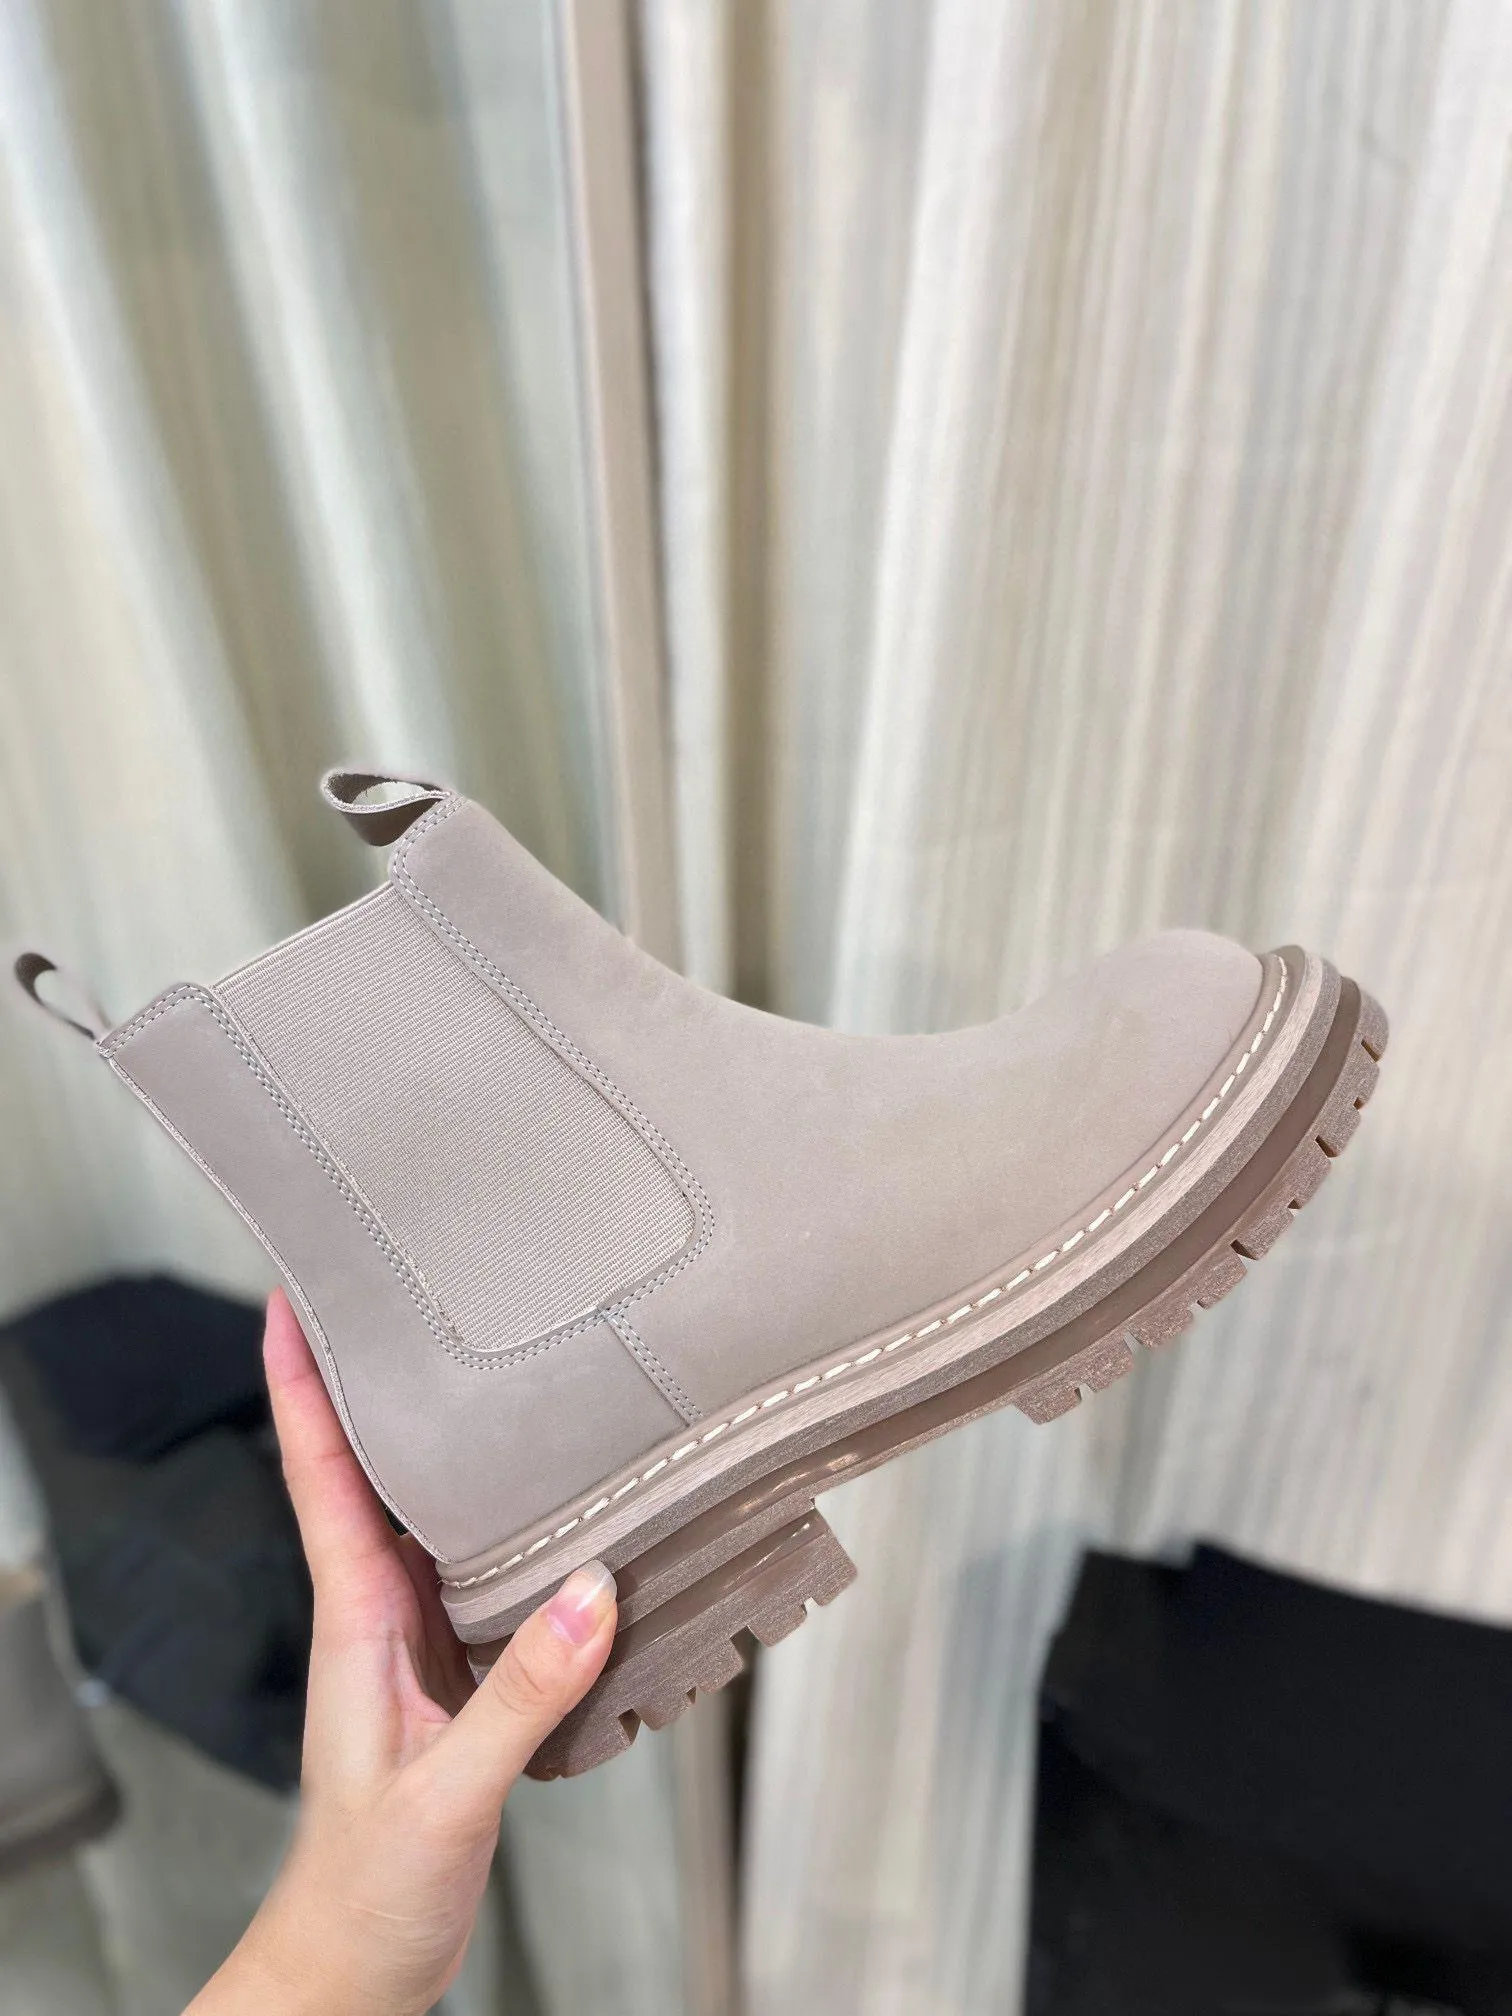 womens Casual Sports shoes Travel women boots Elastic band sneaker leather gym Thick soled men High top shoe designer boot platform lady Trainers size 35-40 With box